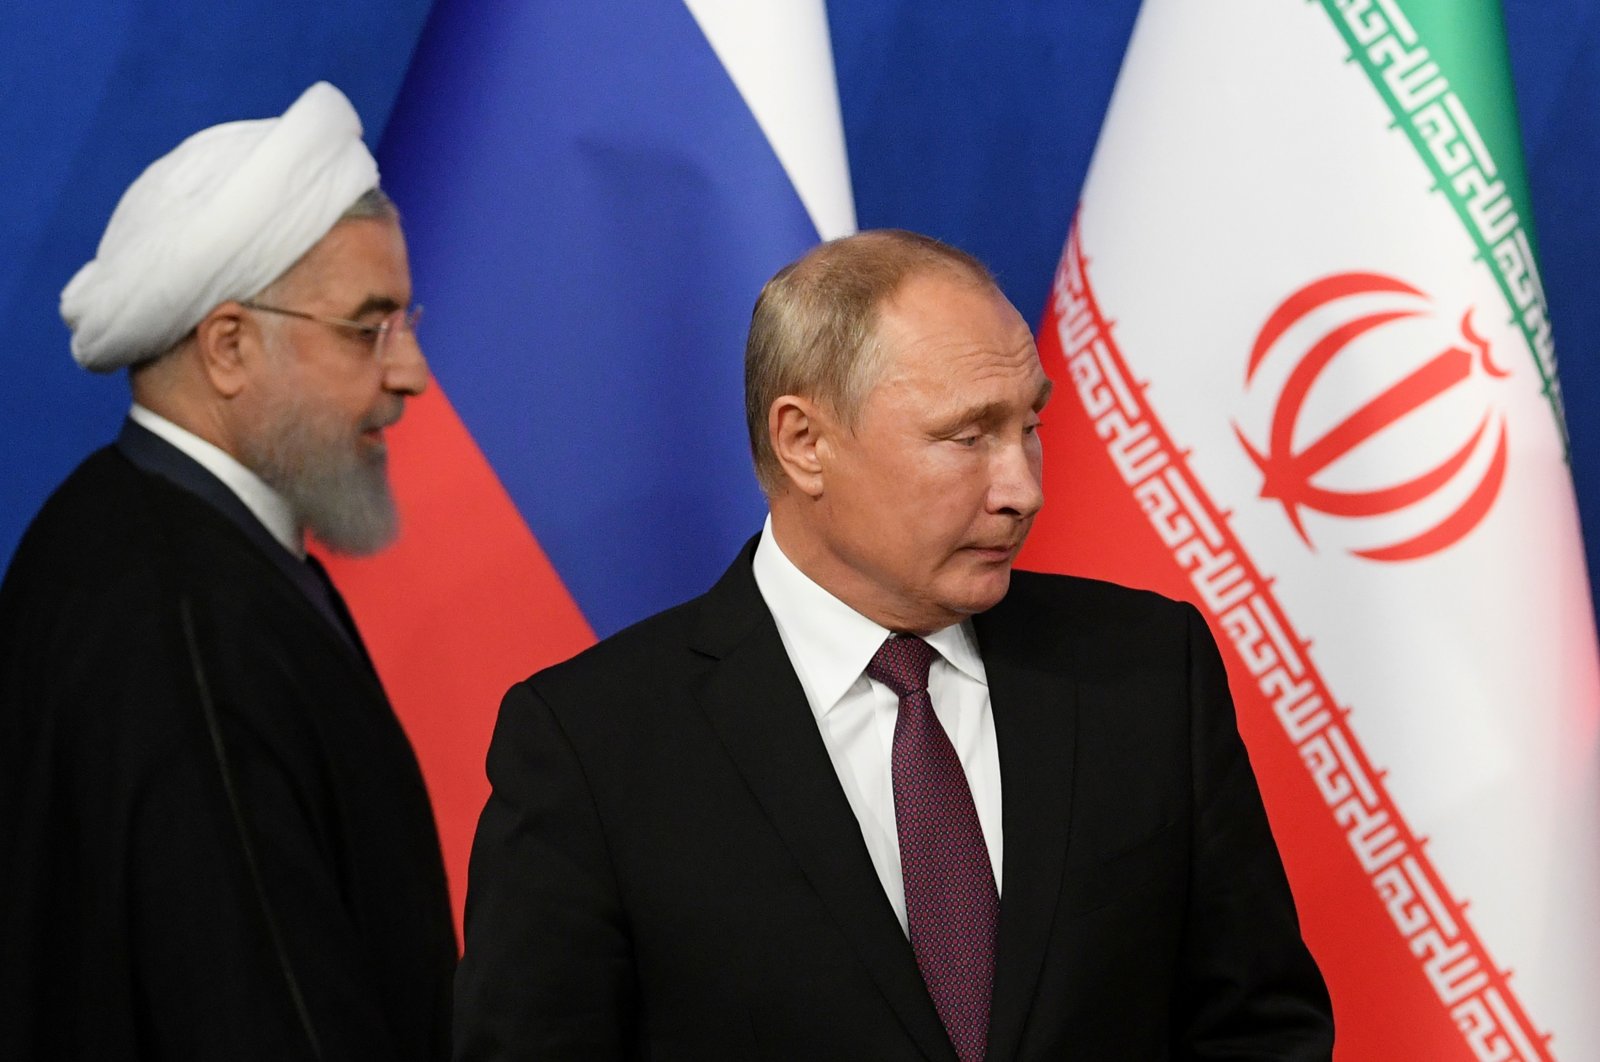 Iranian President Hassan Rouhani (L) and his Russian counterpart President Vladimir Putin arrive for a news conference following their meeting in Tehran, Iran, Sep. 7, 2018. (Reuters Photo)